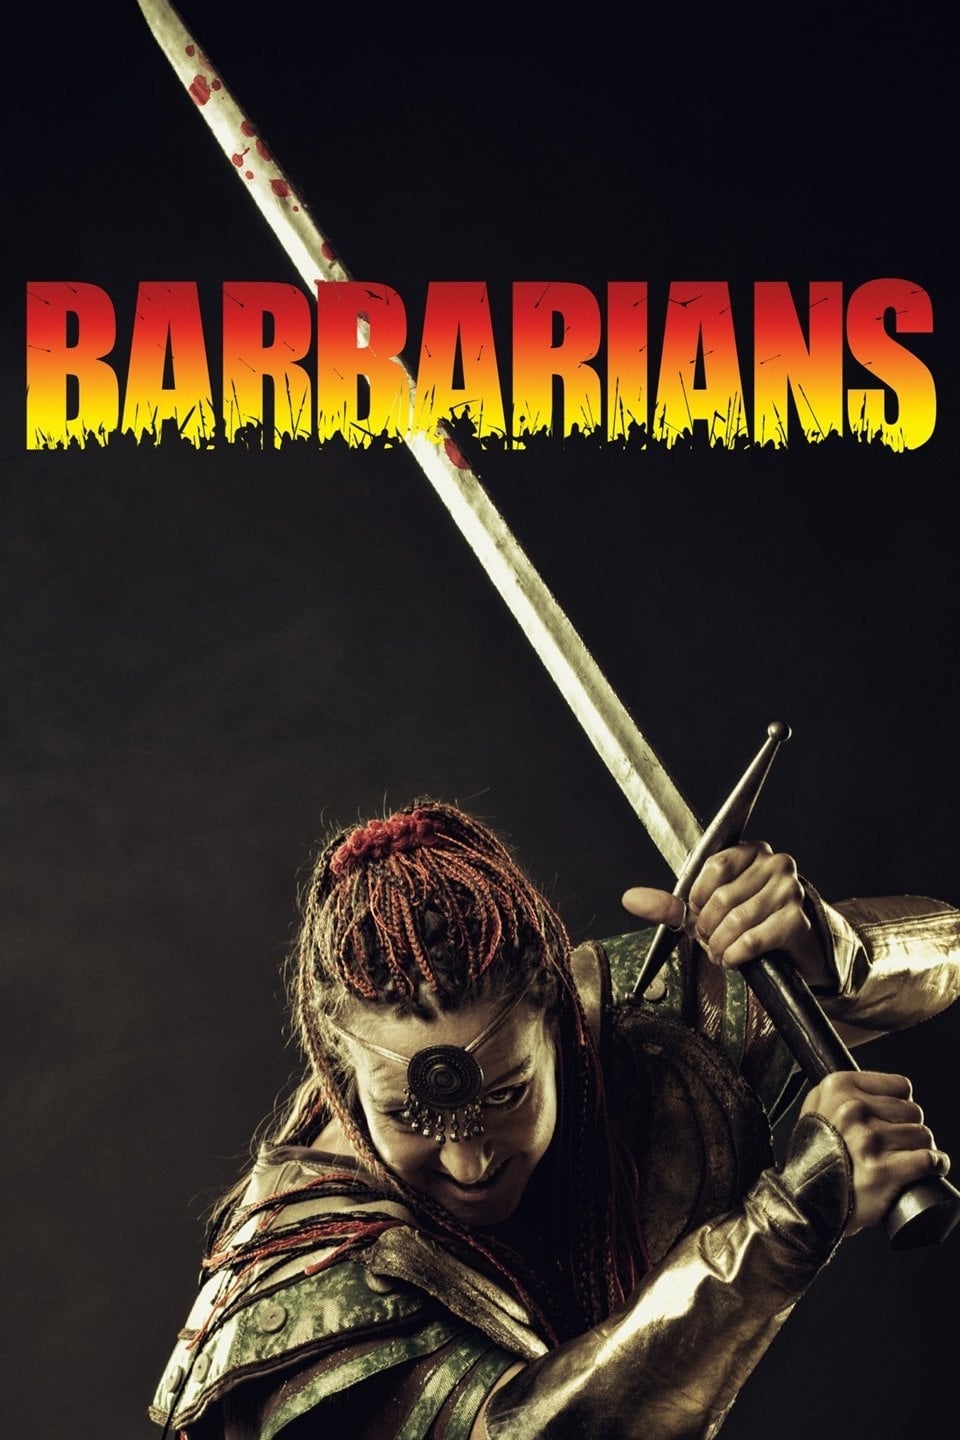 Barbarians TV Shows About Middle Ages